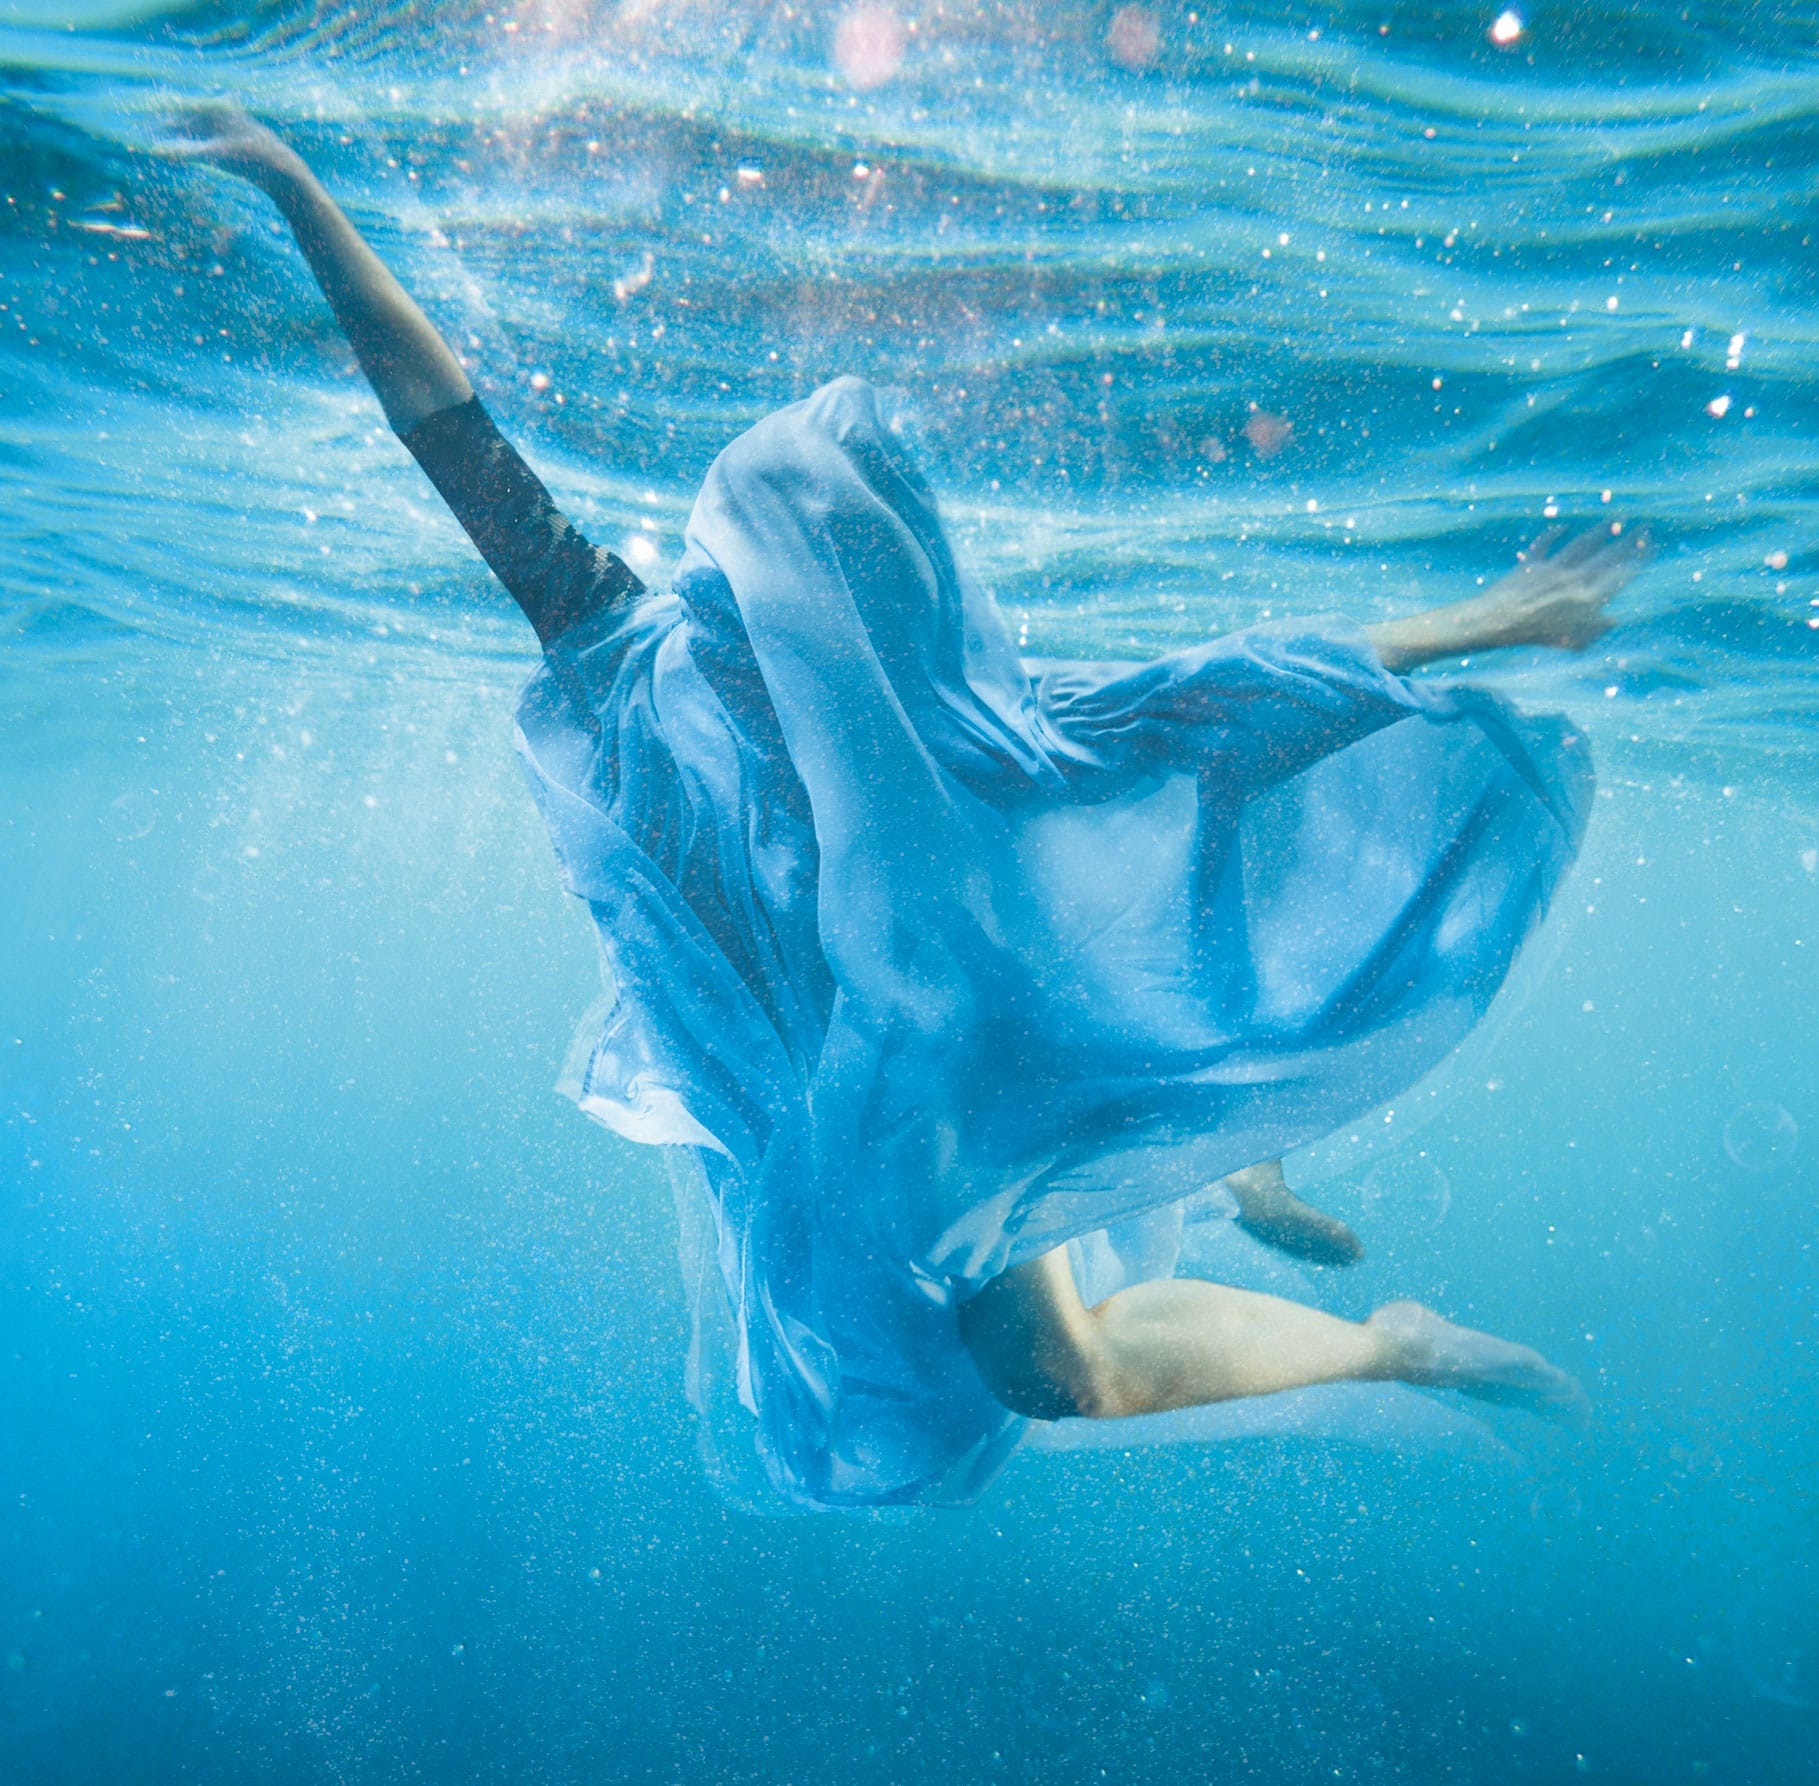 A dancer poses underwater in a clear blue ocean setting, with light streaming down from the surface. The dancer is covered entirely in flowing blue fabric, almost allowing them to blend in with the scenic waves.